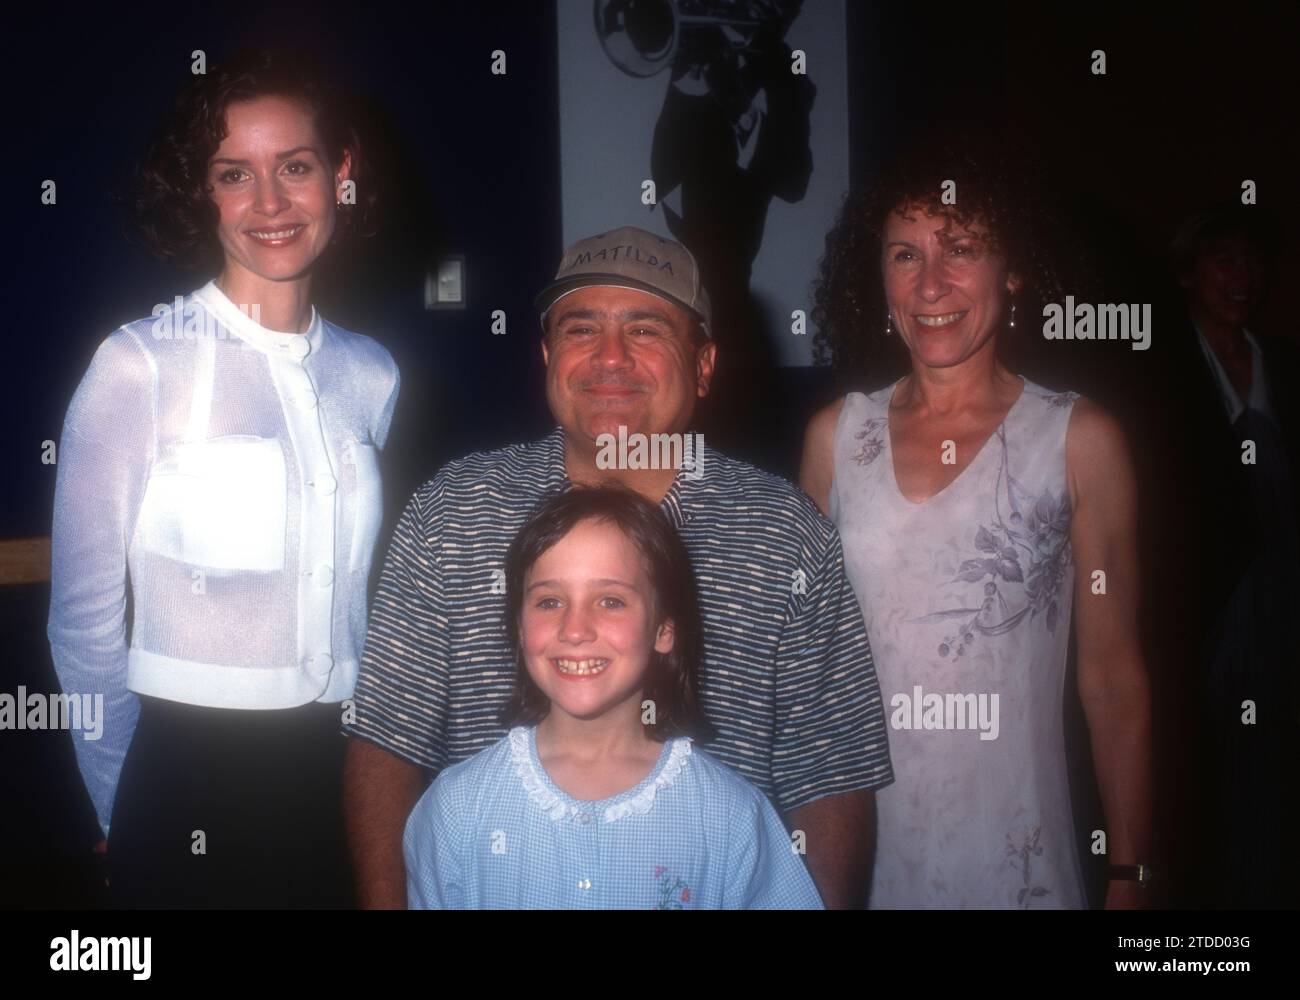 Culver City, California, USA 28th July 1996 Actress Embeth Davitz, Actor Danny DeVito,Actress Mara Wilson and Actress Rhea Perlman attend Matilda Premiere at Mann Culver Theater on July 28, 1996 in Cuvler City, California, USA. Photo by Barry King/Alamy Stock Photo Stock Photo